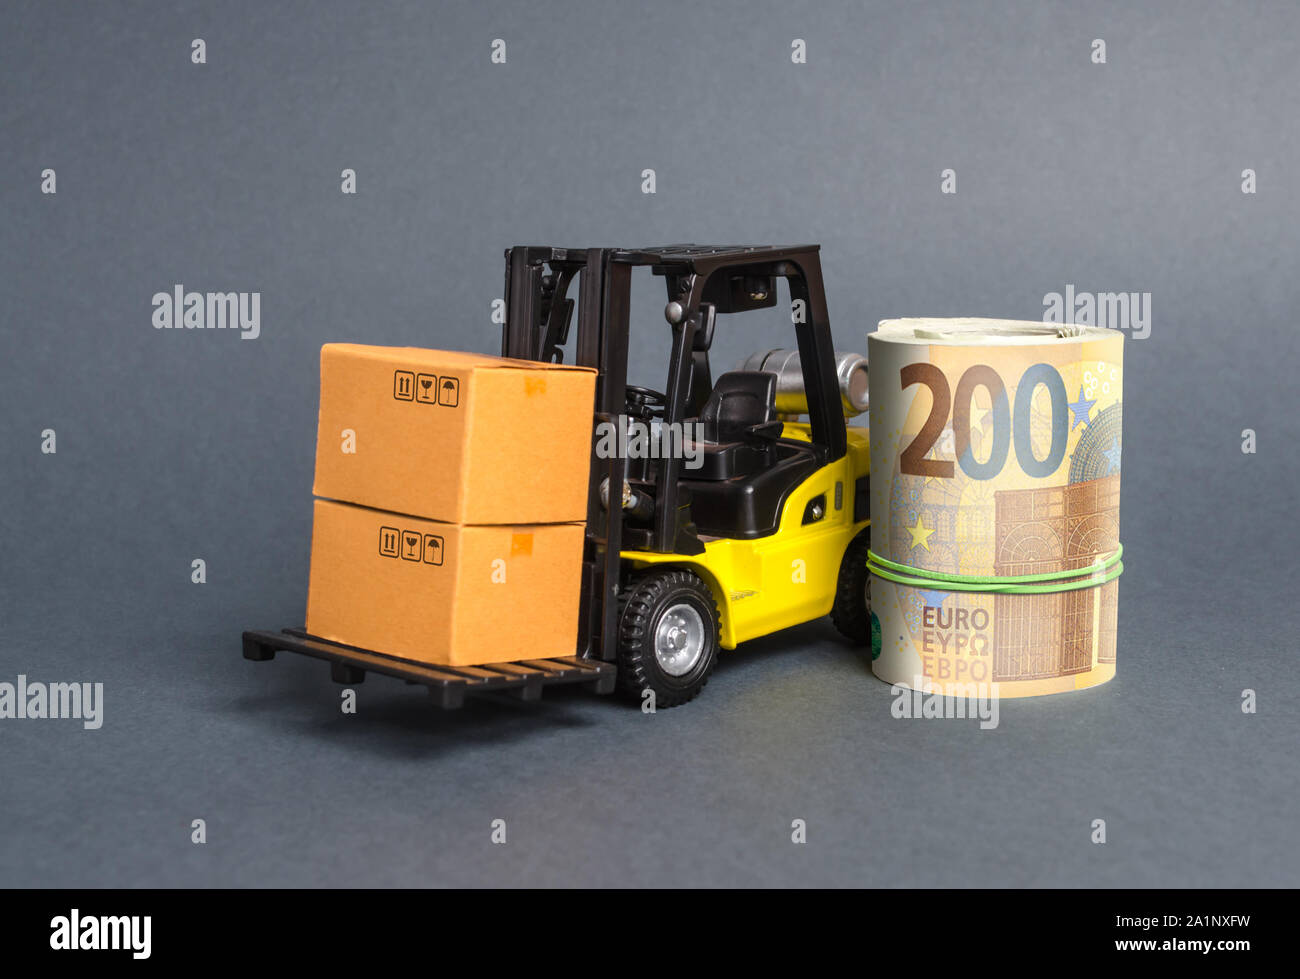 A forklift truck carries cardboard boxes and Euro roll. Transport company. Performance efficient. Trade and production of products and goods, balance Stock Photo